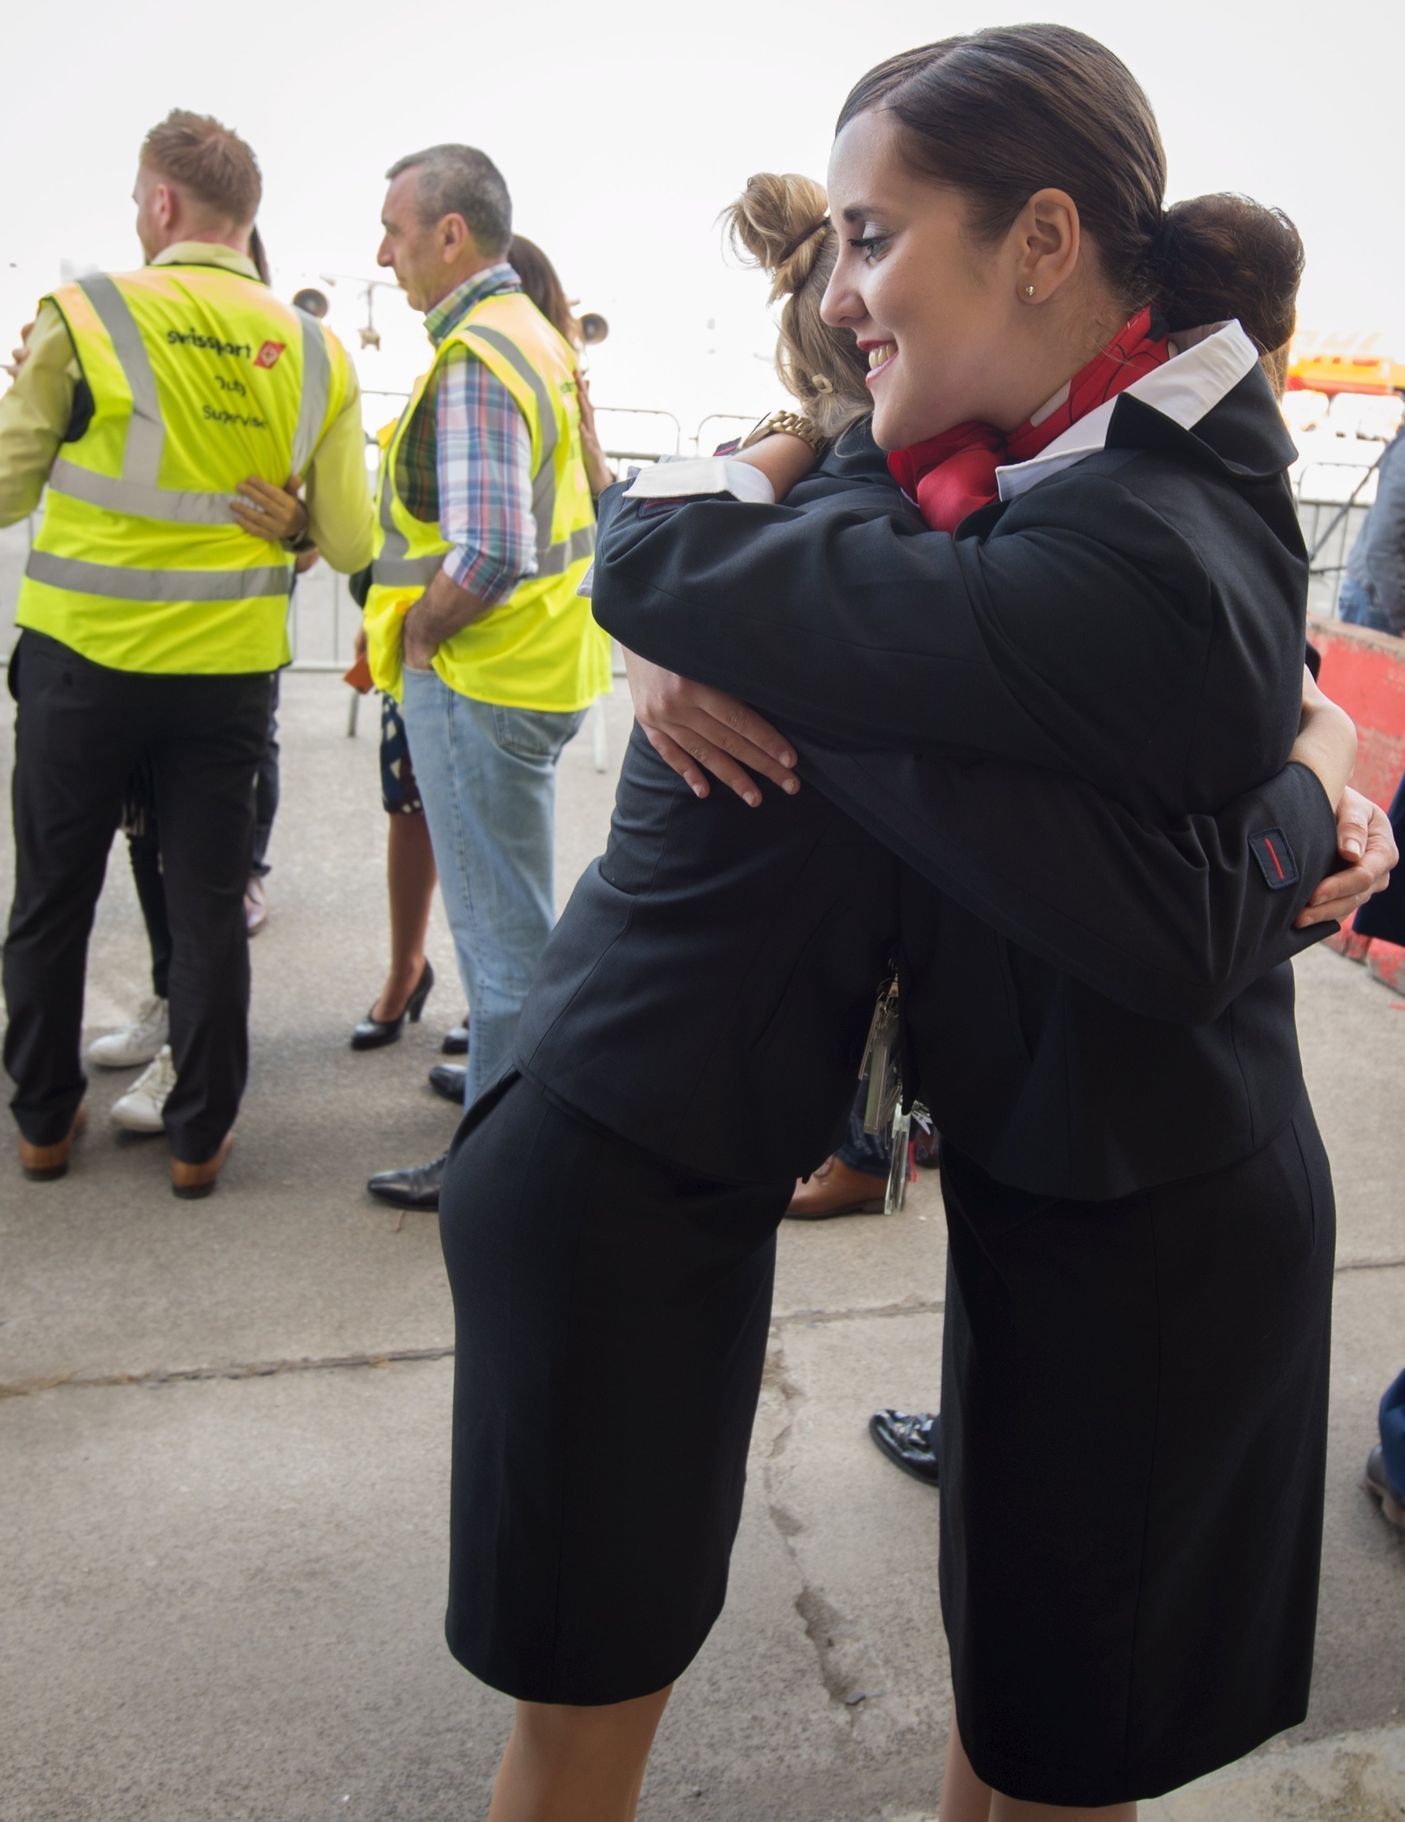 Brusel letiště otevření Brussels Airport staff hug as the first plane takes off from Brussels Airport, which partially re-opened following a bomb blast 12 days ago, in Zaventem